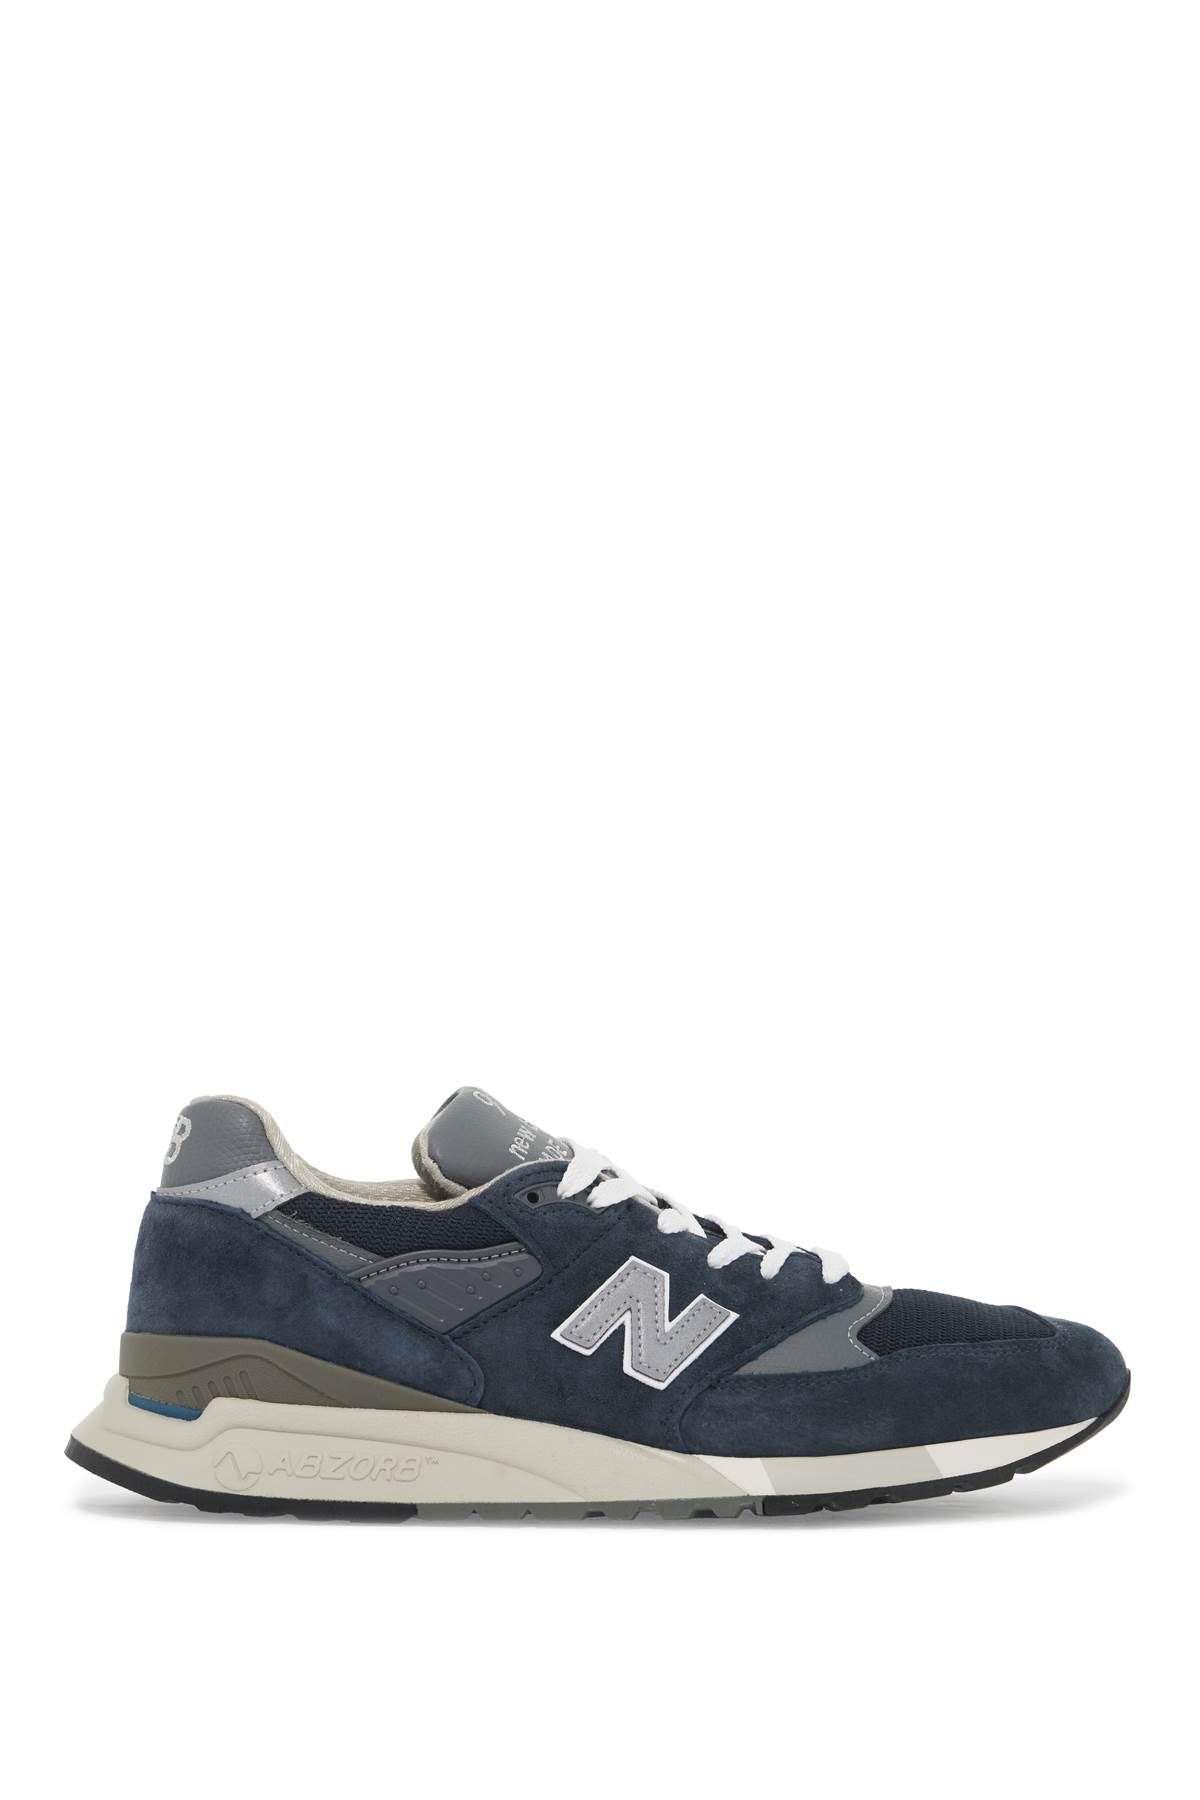 New Balance NEW BALANCE made in usa 998 core sneakers